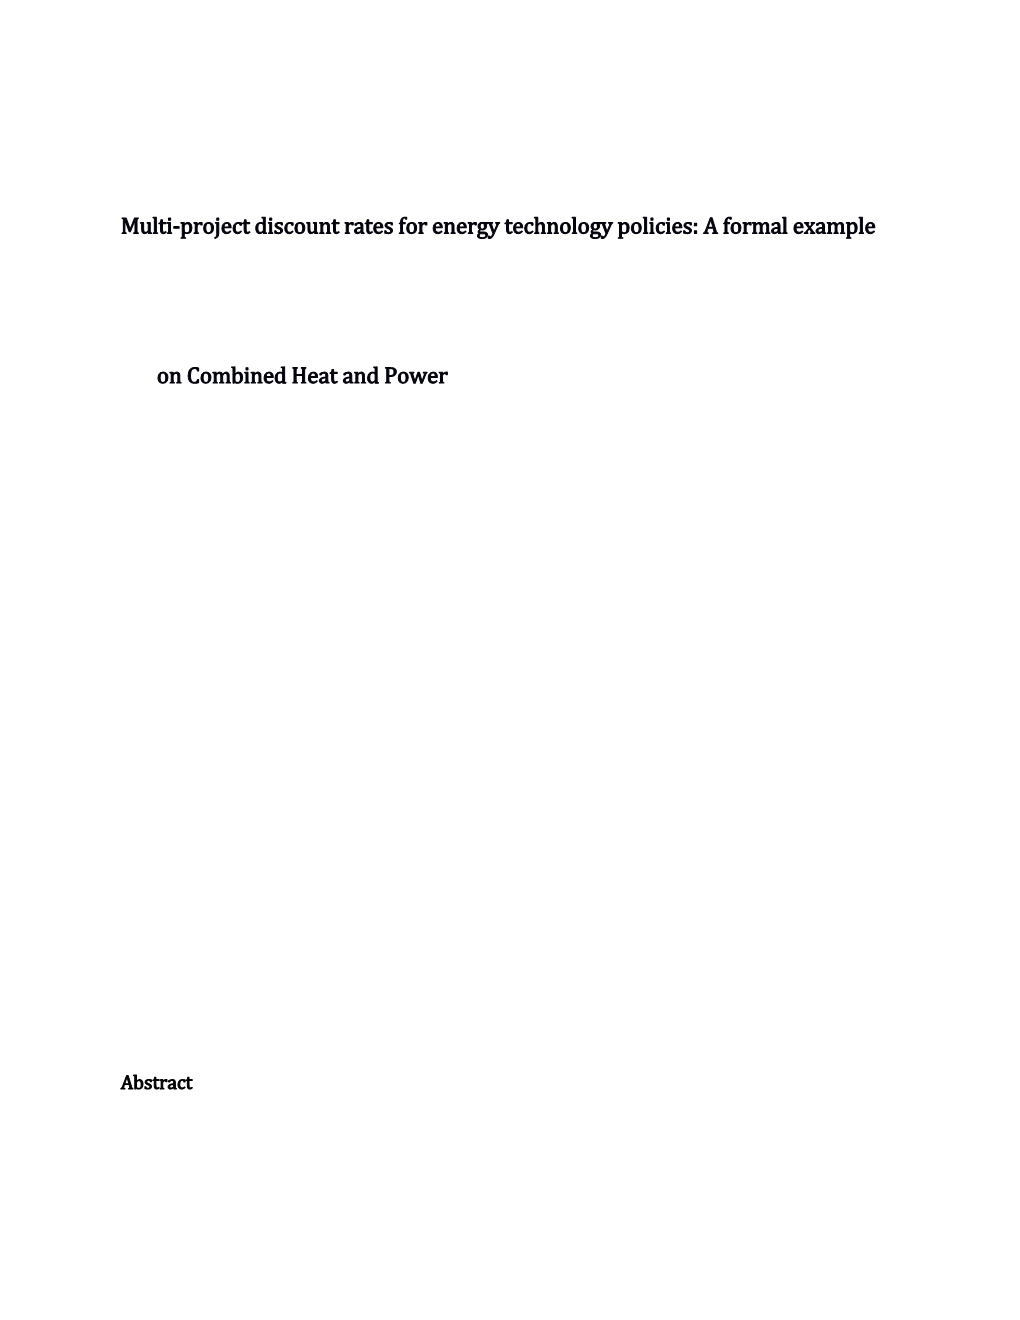 Multi-Project Discount Rates for Energy Technology Policies: a Formal Example on Combined